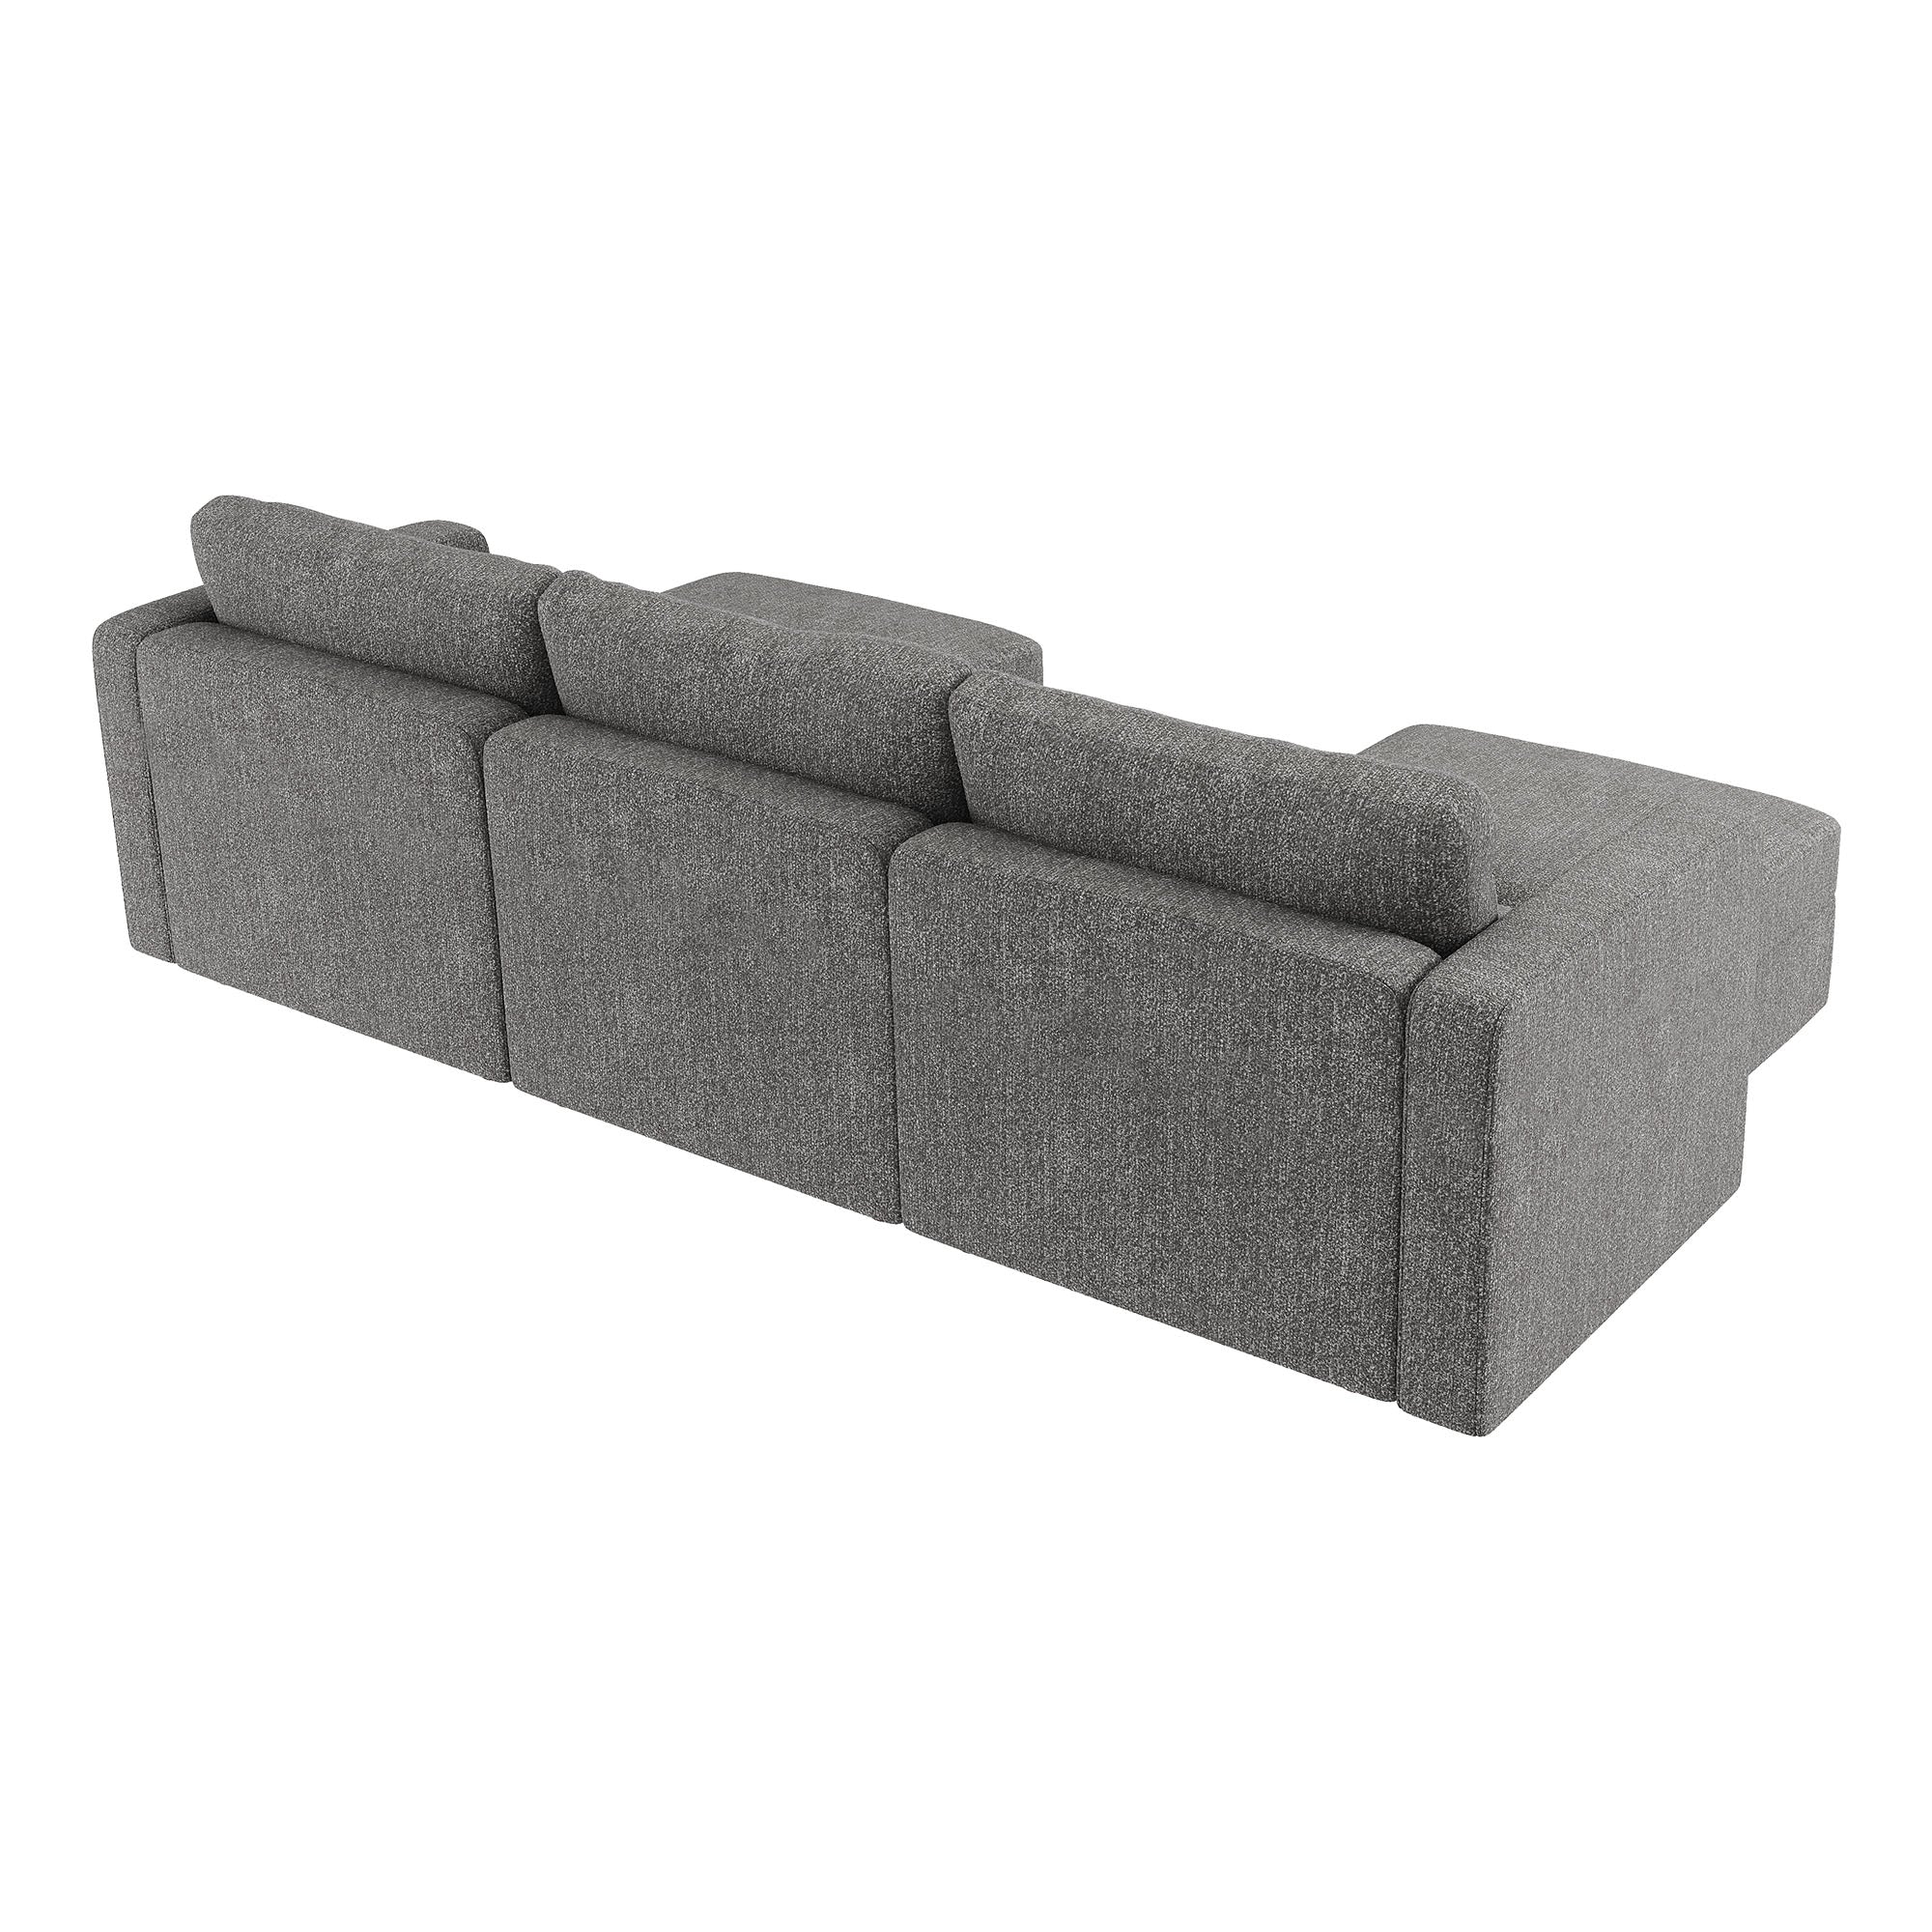 HONBAY Polyester 3 Seaters Modular Sofa with 2 Storage Ottomans